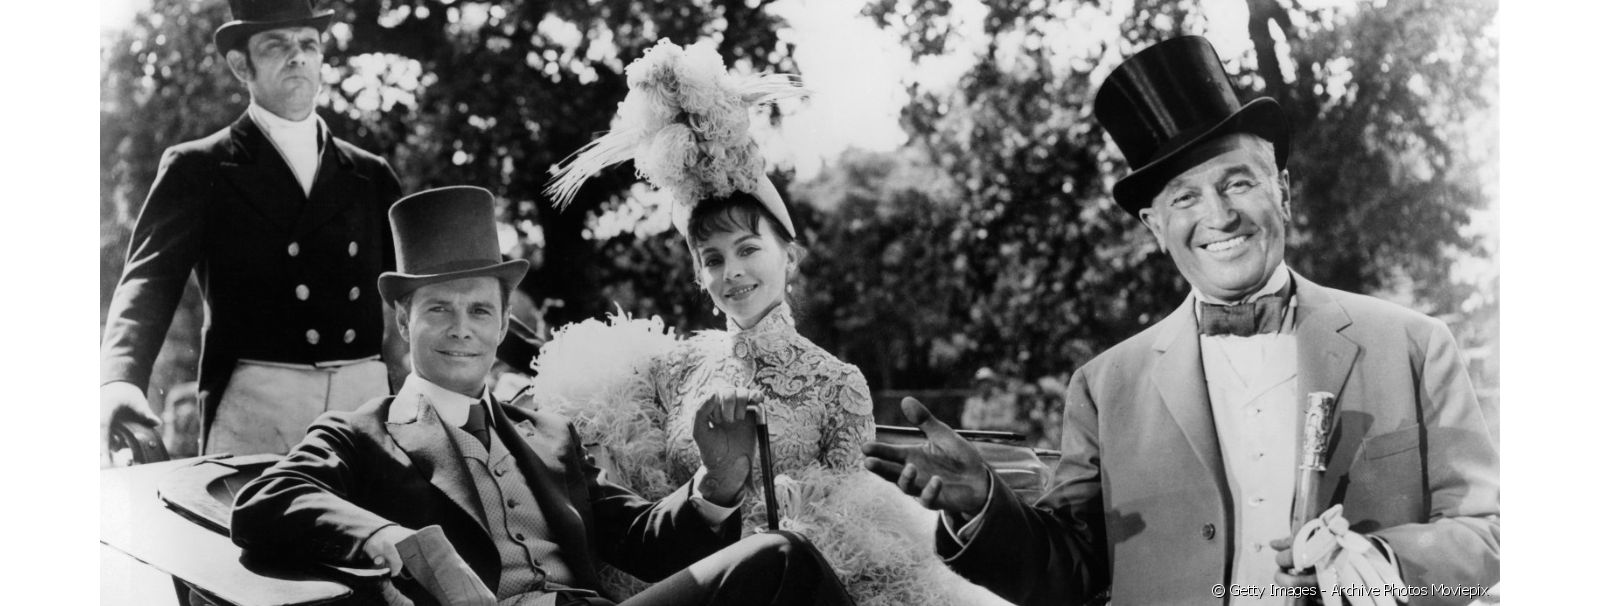 Louis Jourdan in Gigi with Maurice Chevalier and Leslie Caron